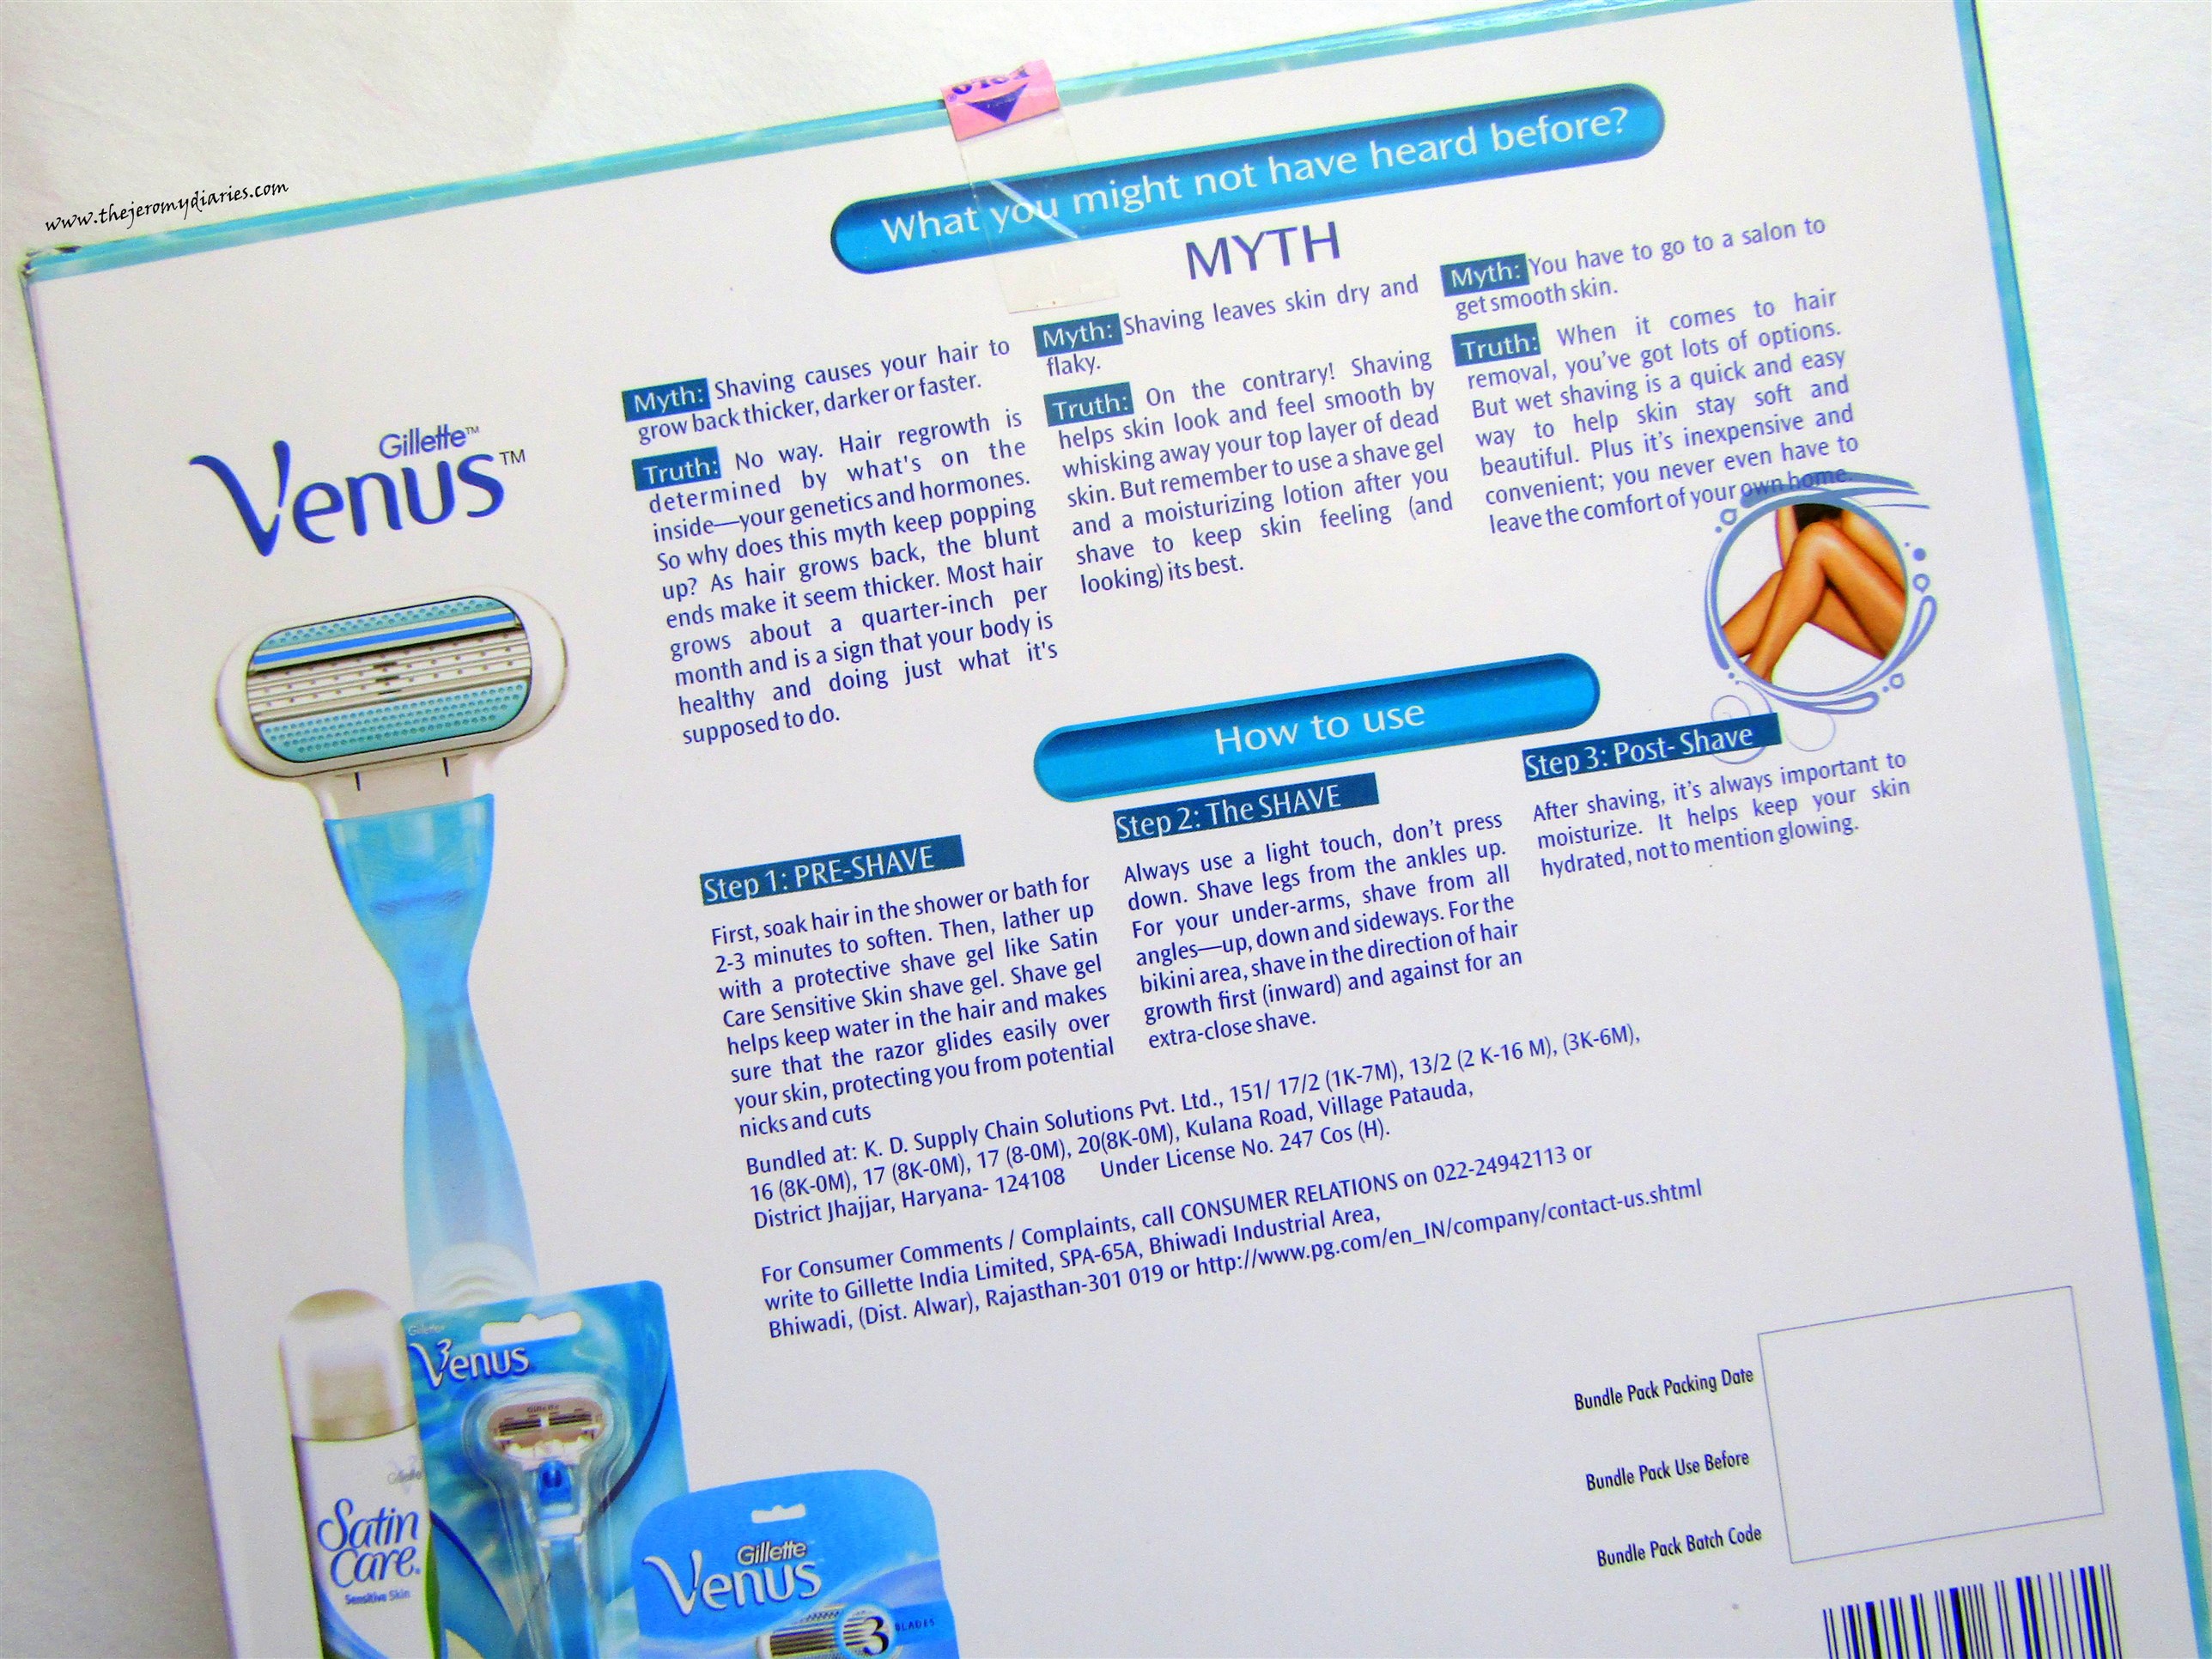 myths about shaving gillette venus the jeromy diaries